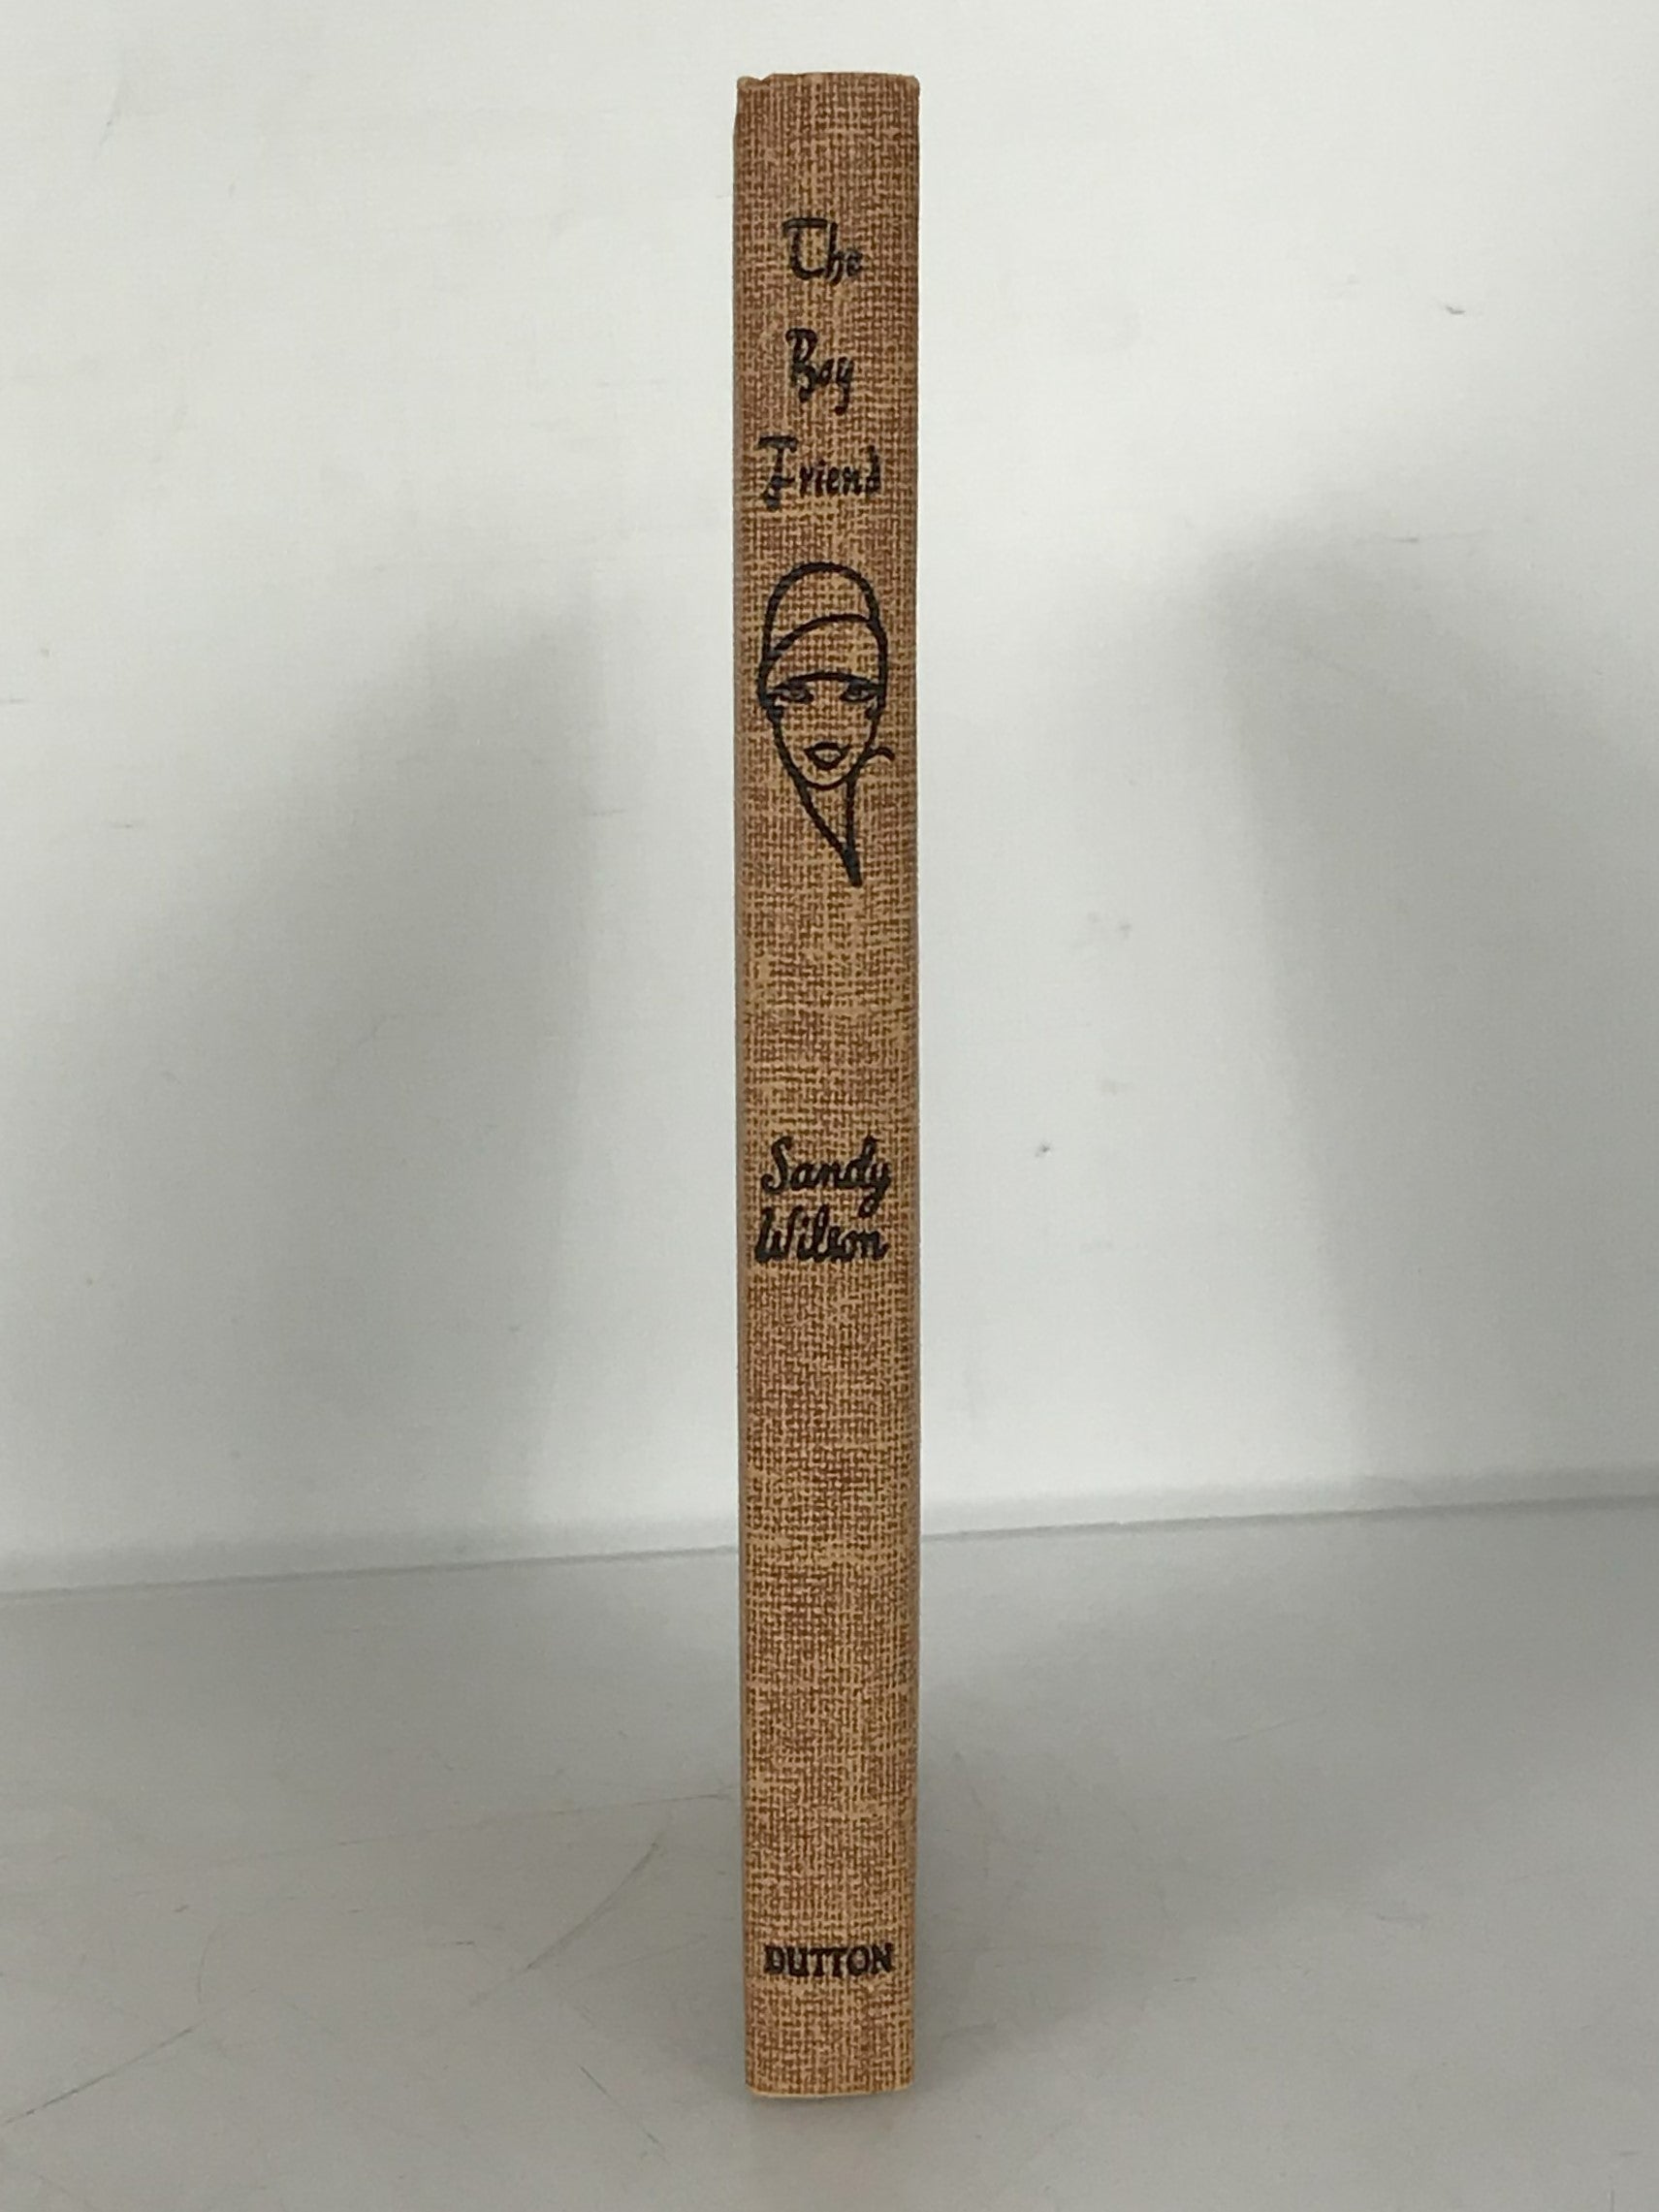 The Boy Friend A Play in Three Acts by Sandy Wilson Stated First Edition 1955 HC DJ